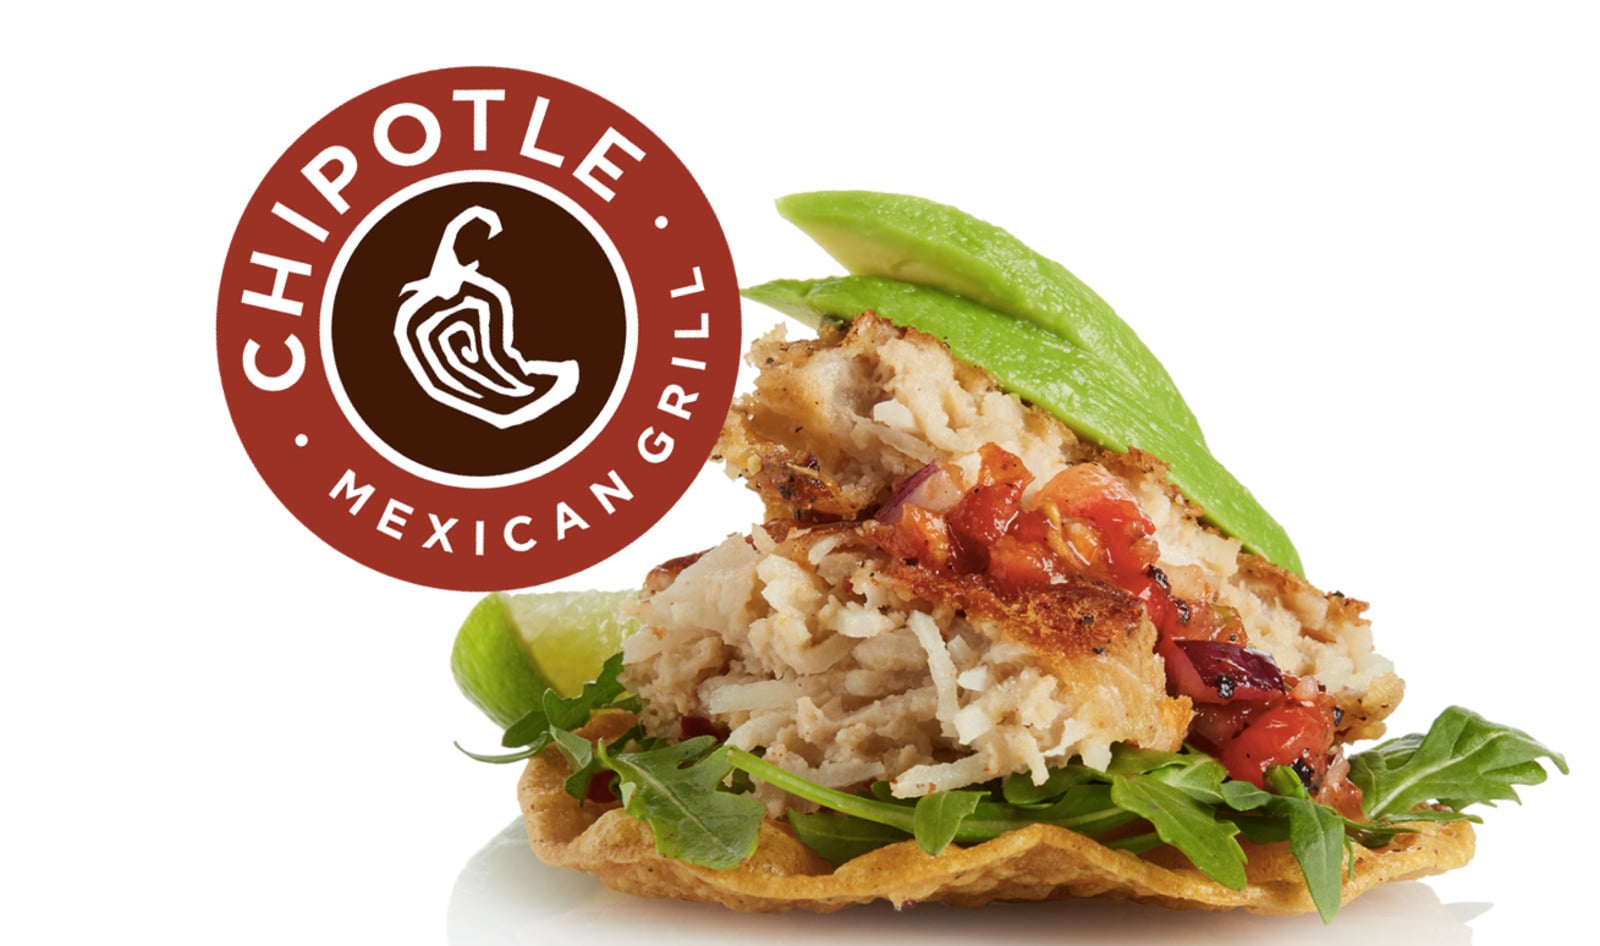 Will Vegan Seafood Be an Option at Chipotle?